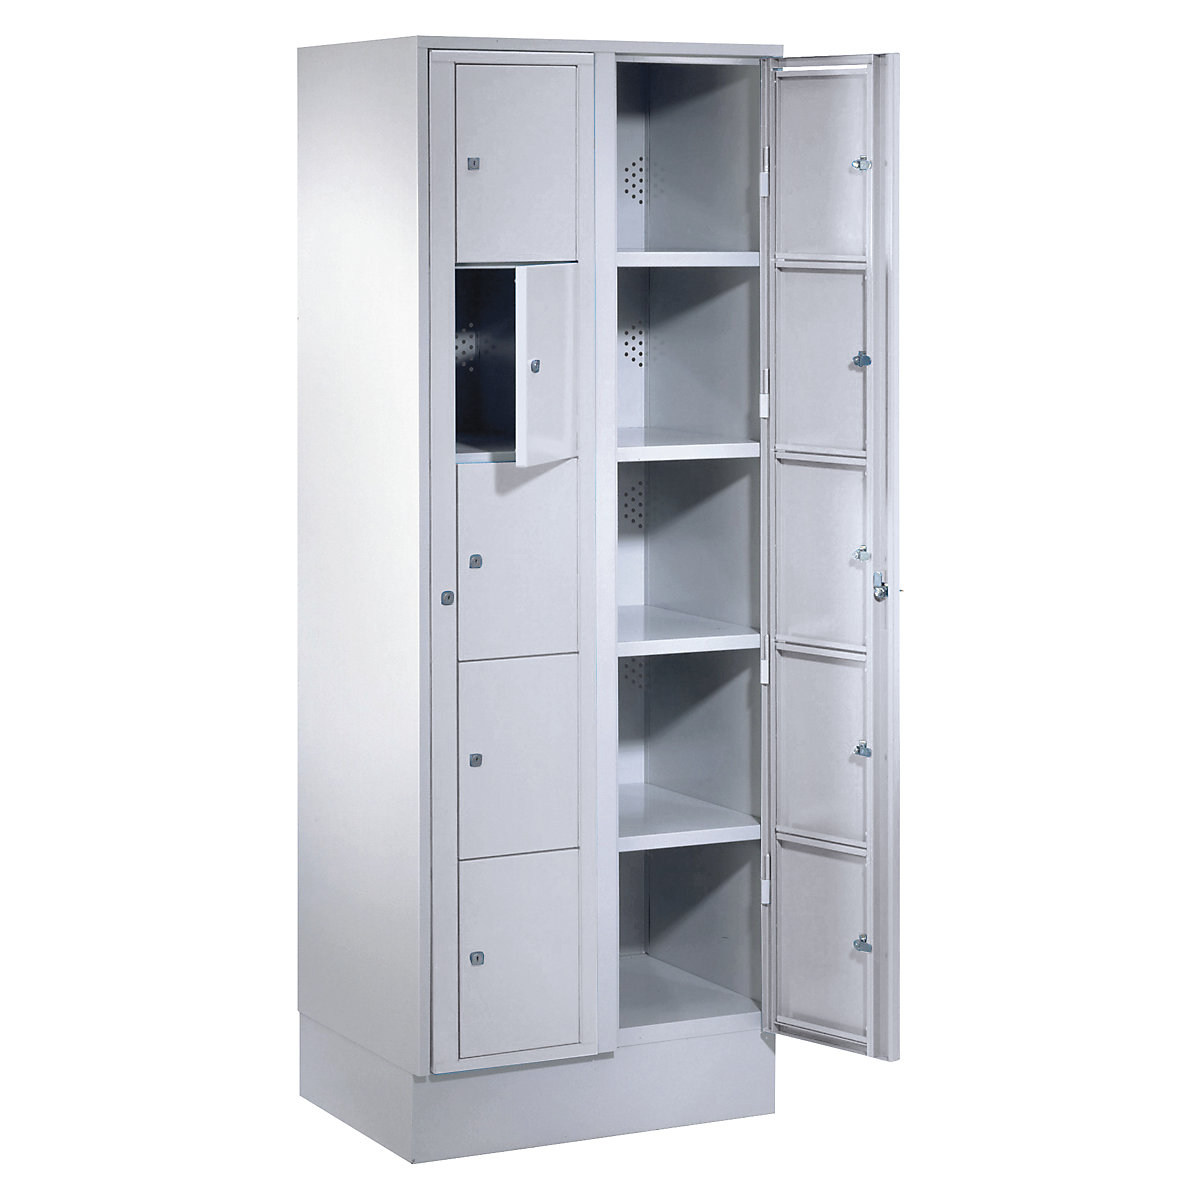 Laundry cabinet – Wolf, HxWxD 1800 x 700 x 500 mm, 10 compartments, light grey/light grey-11